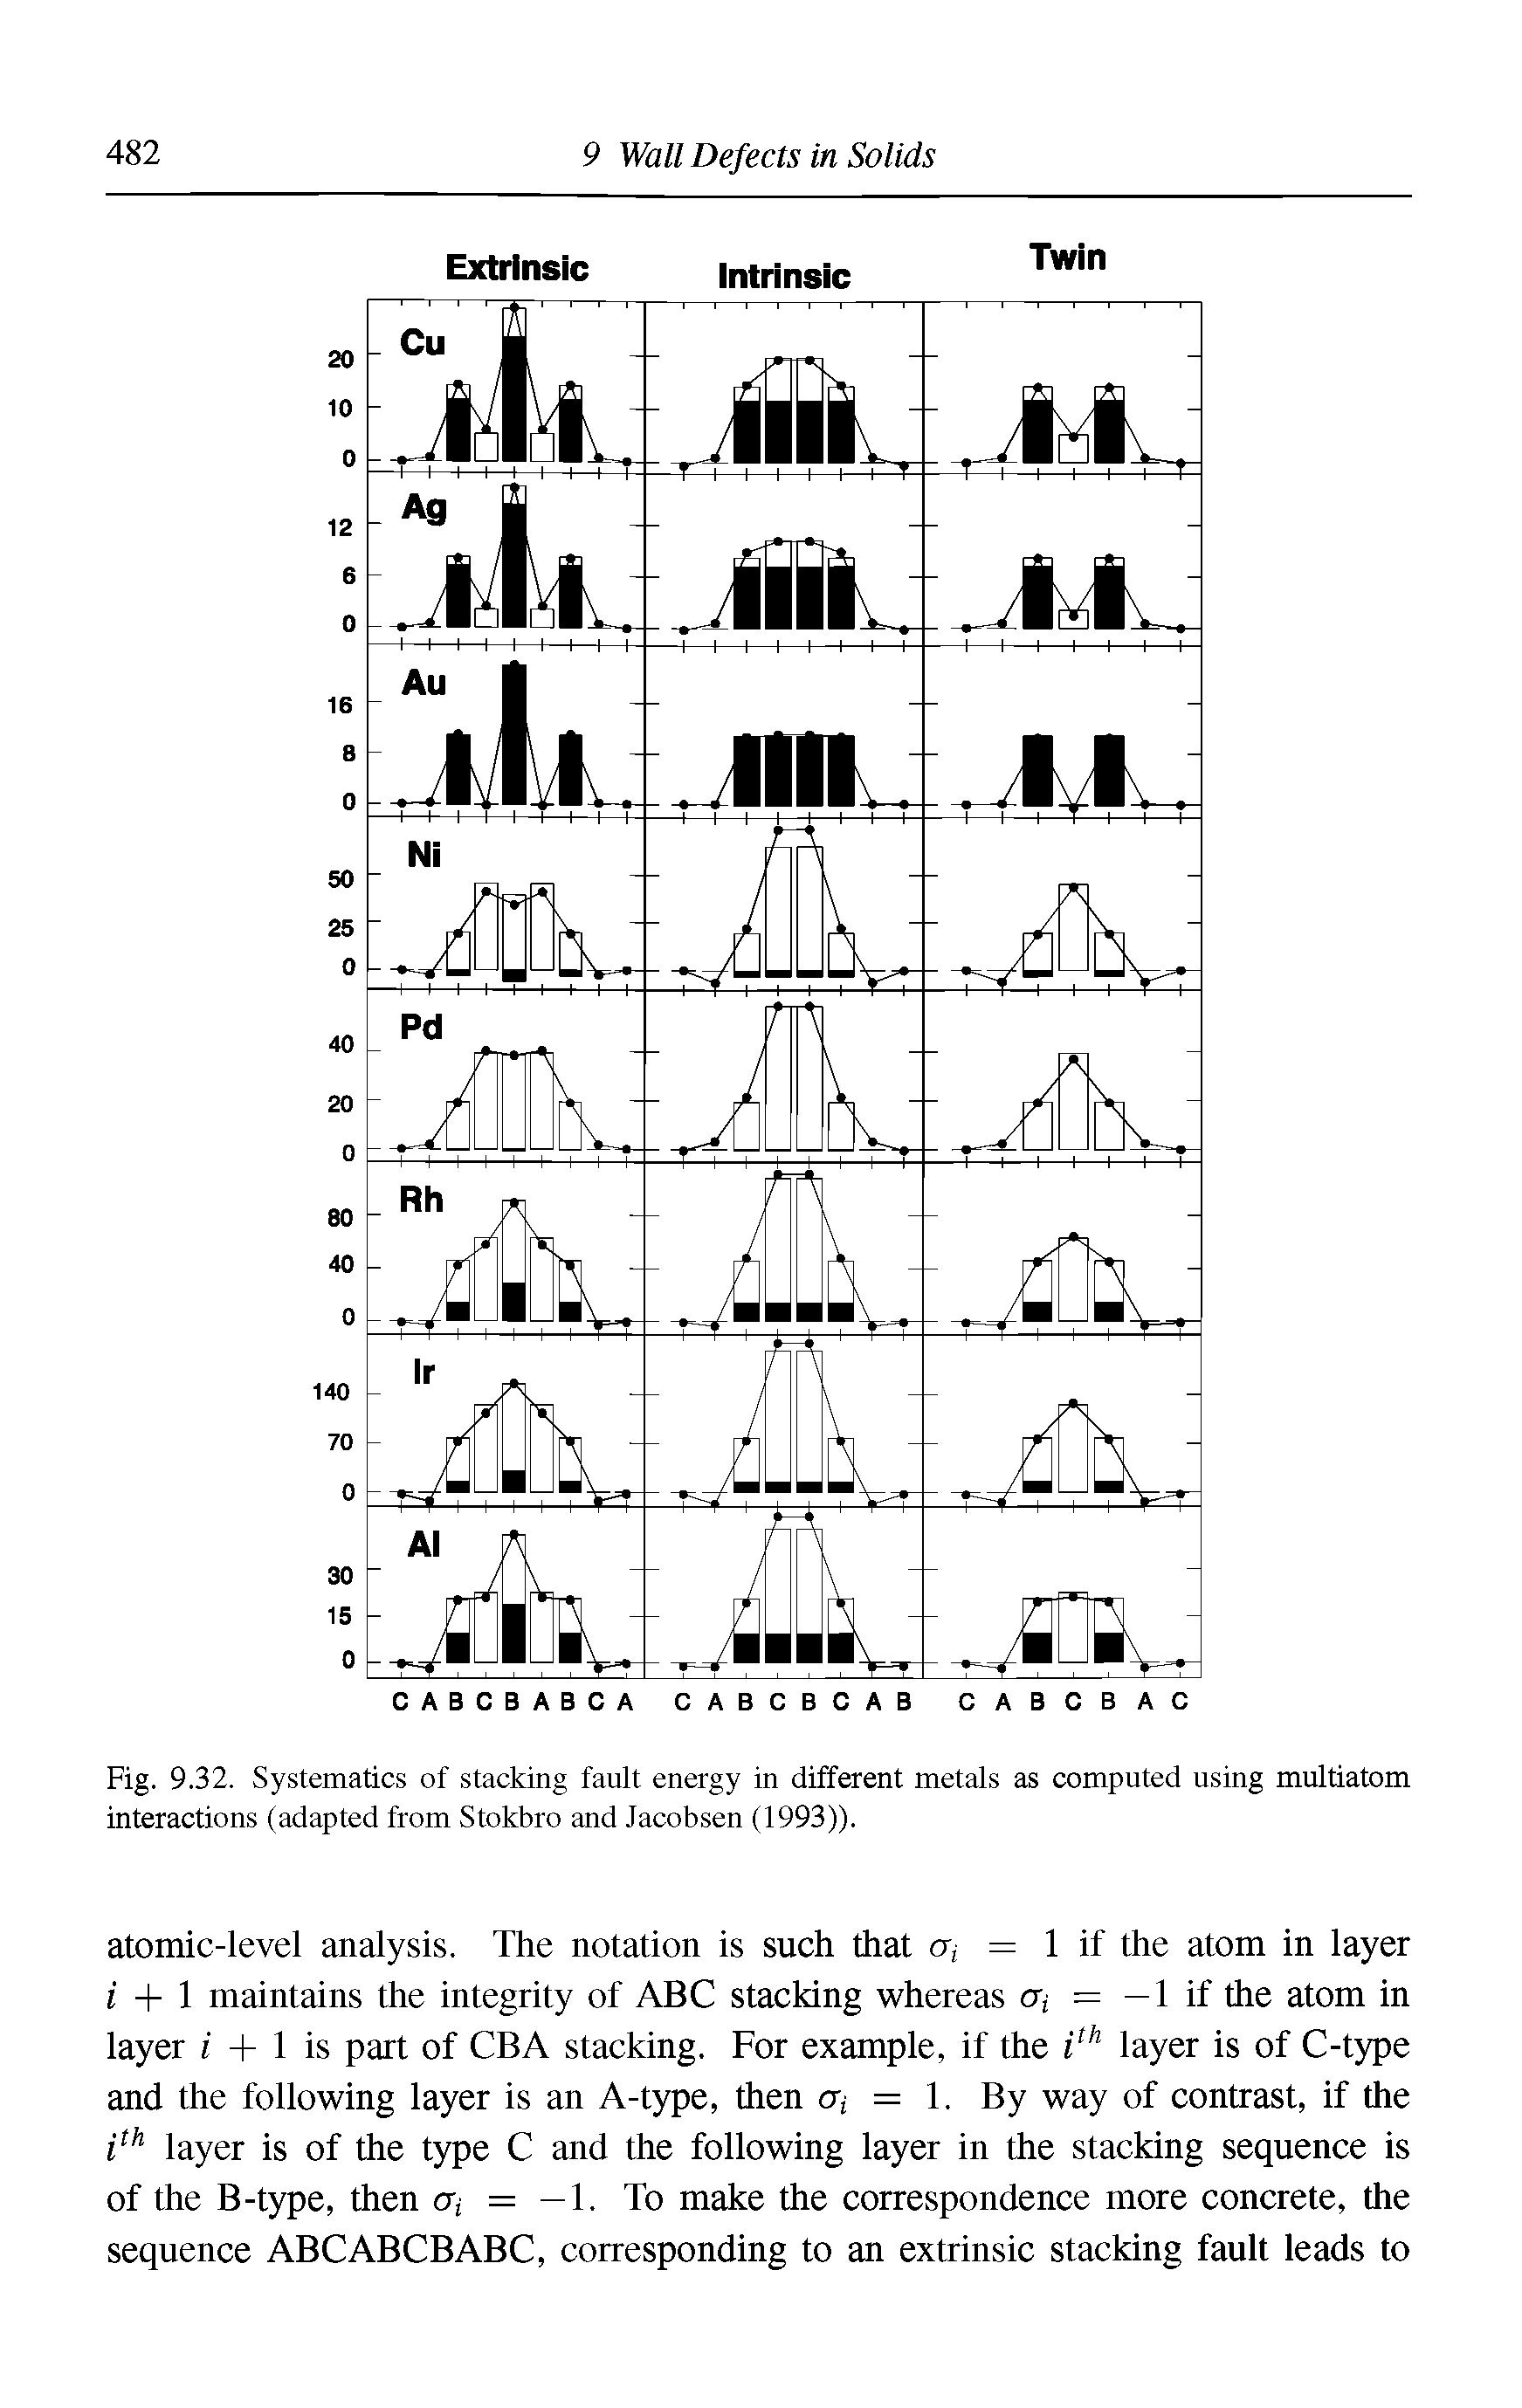 Fig. 9.32. Systematics of stacking fault energy in different metals as computed using multiatom interactions (adapted from Stokbro and Jacobsen (1993)).